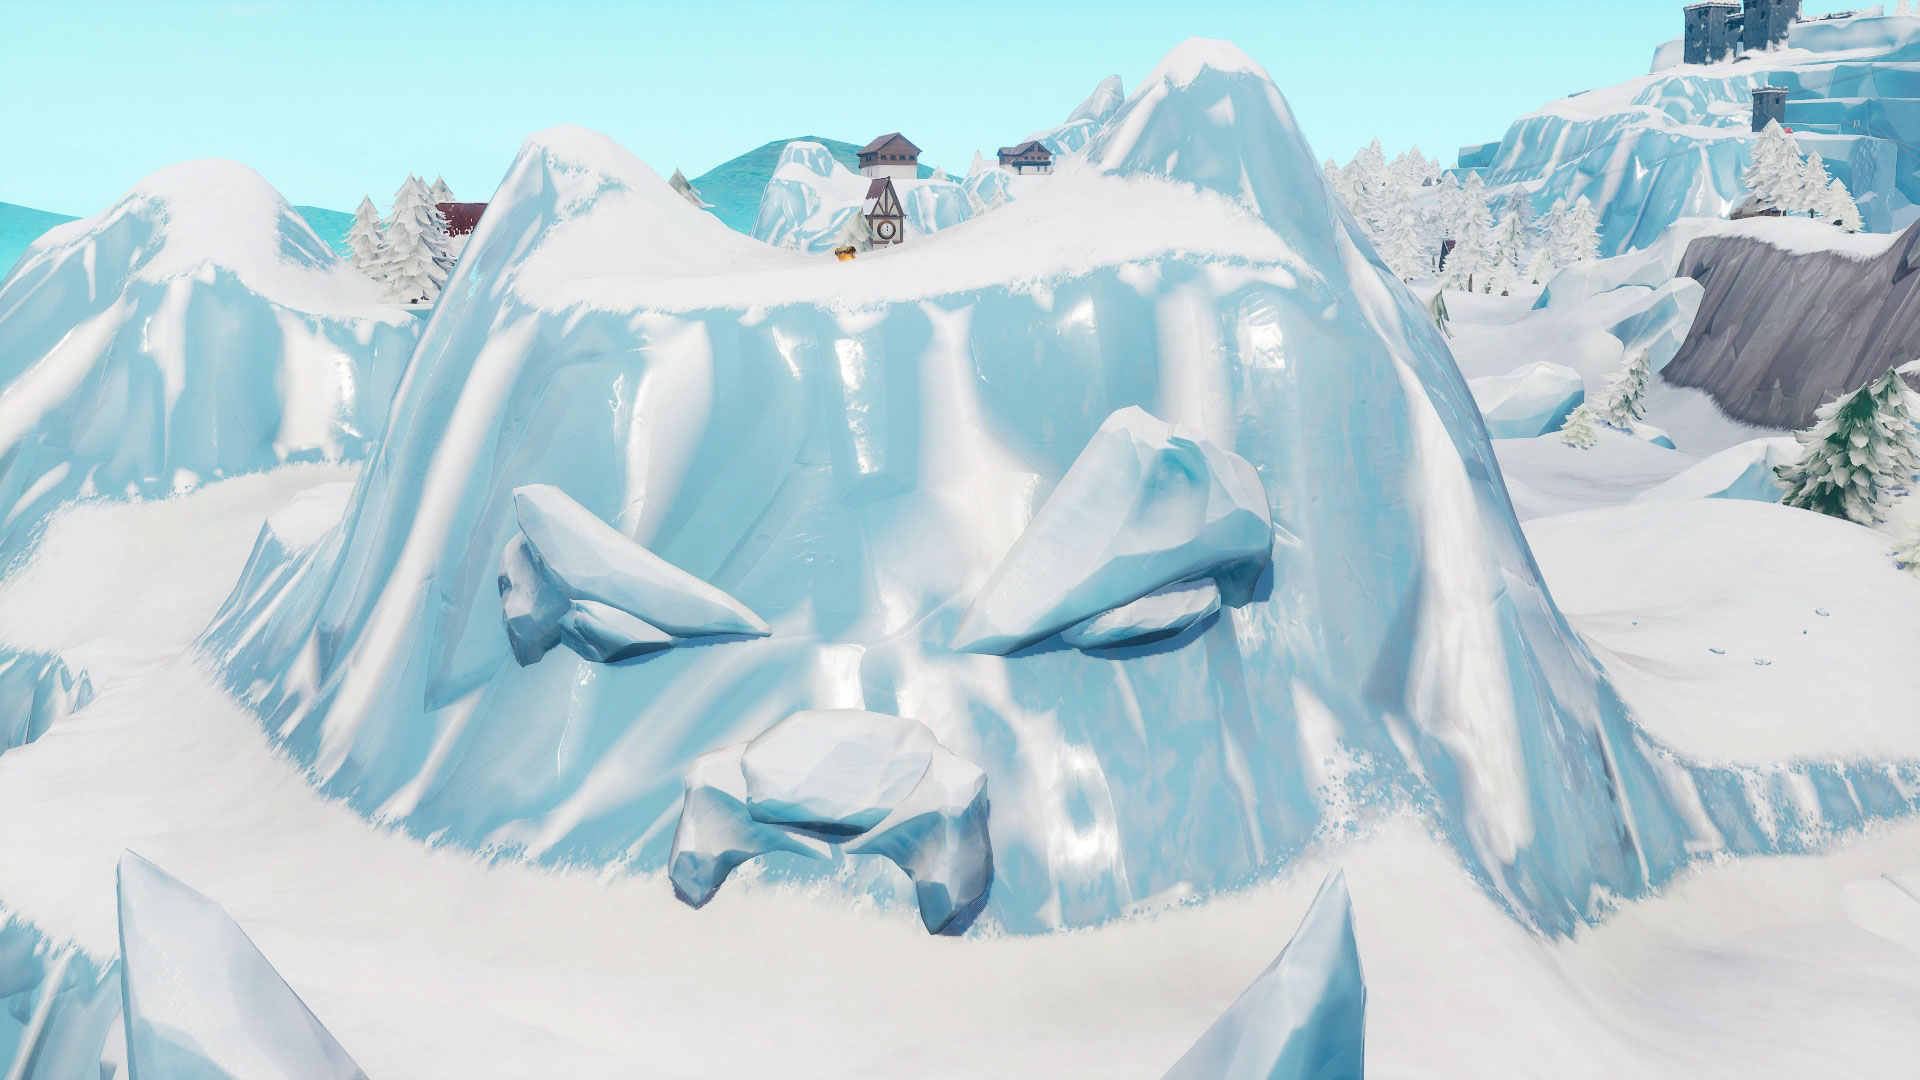 where to visit a giant face in the desert the jungle and the snow in fortnite season 8 week 1 challenge gamesradar - visit giant face in desert jungle snow fortnite